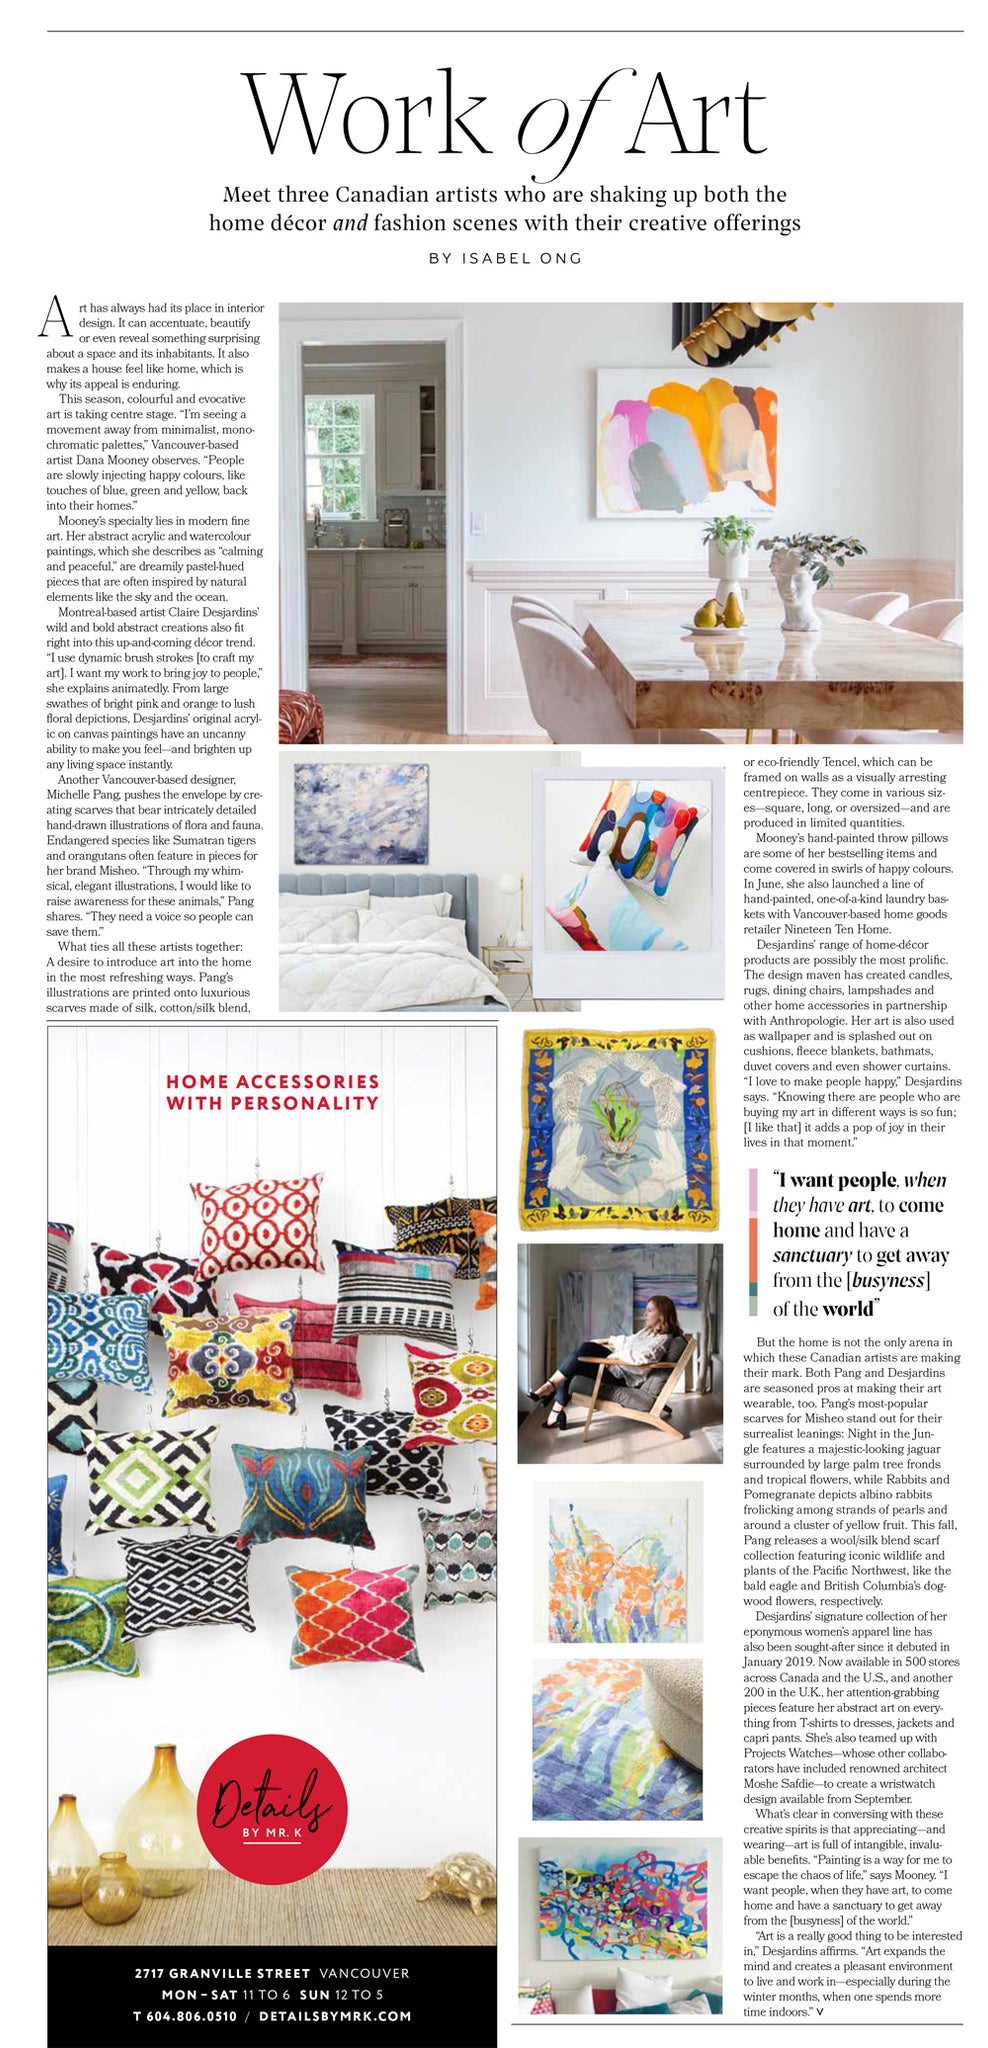 Work of Art - Globe and Mail, features work by abstract artist, Claire Desjardins.